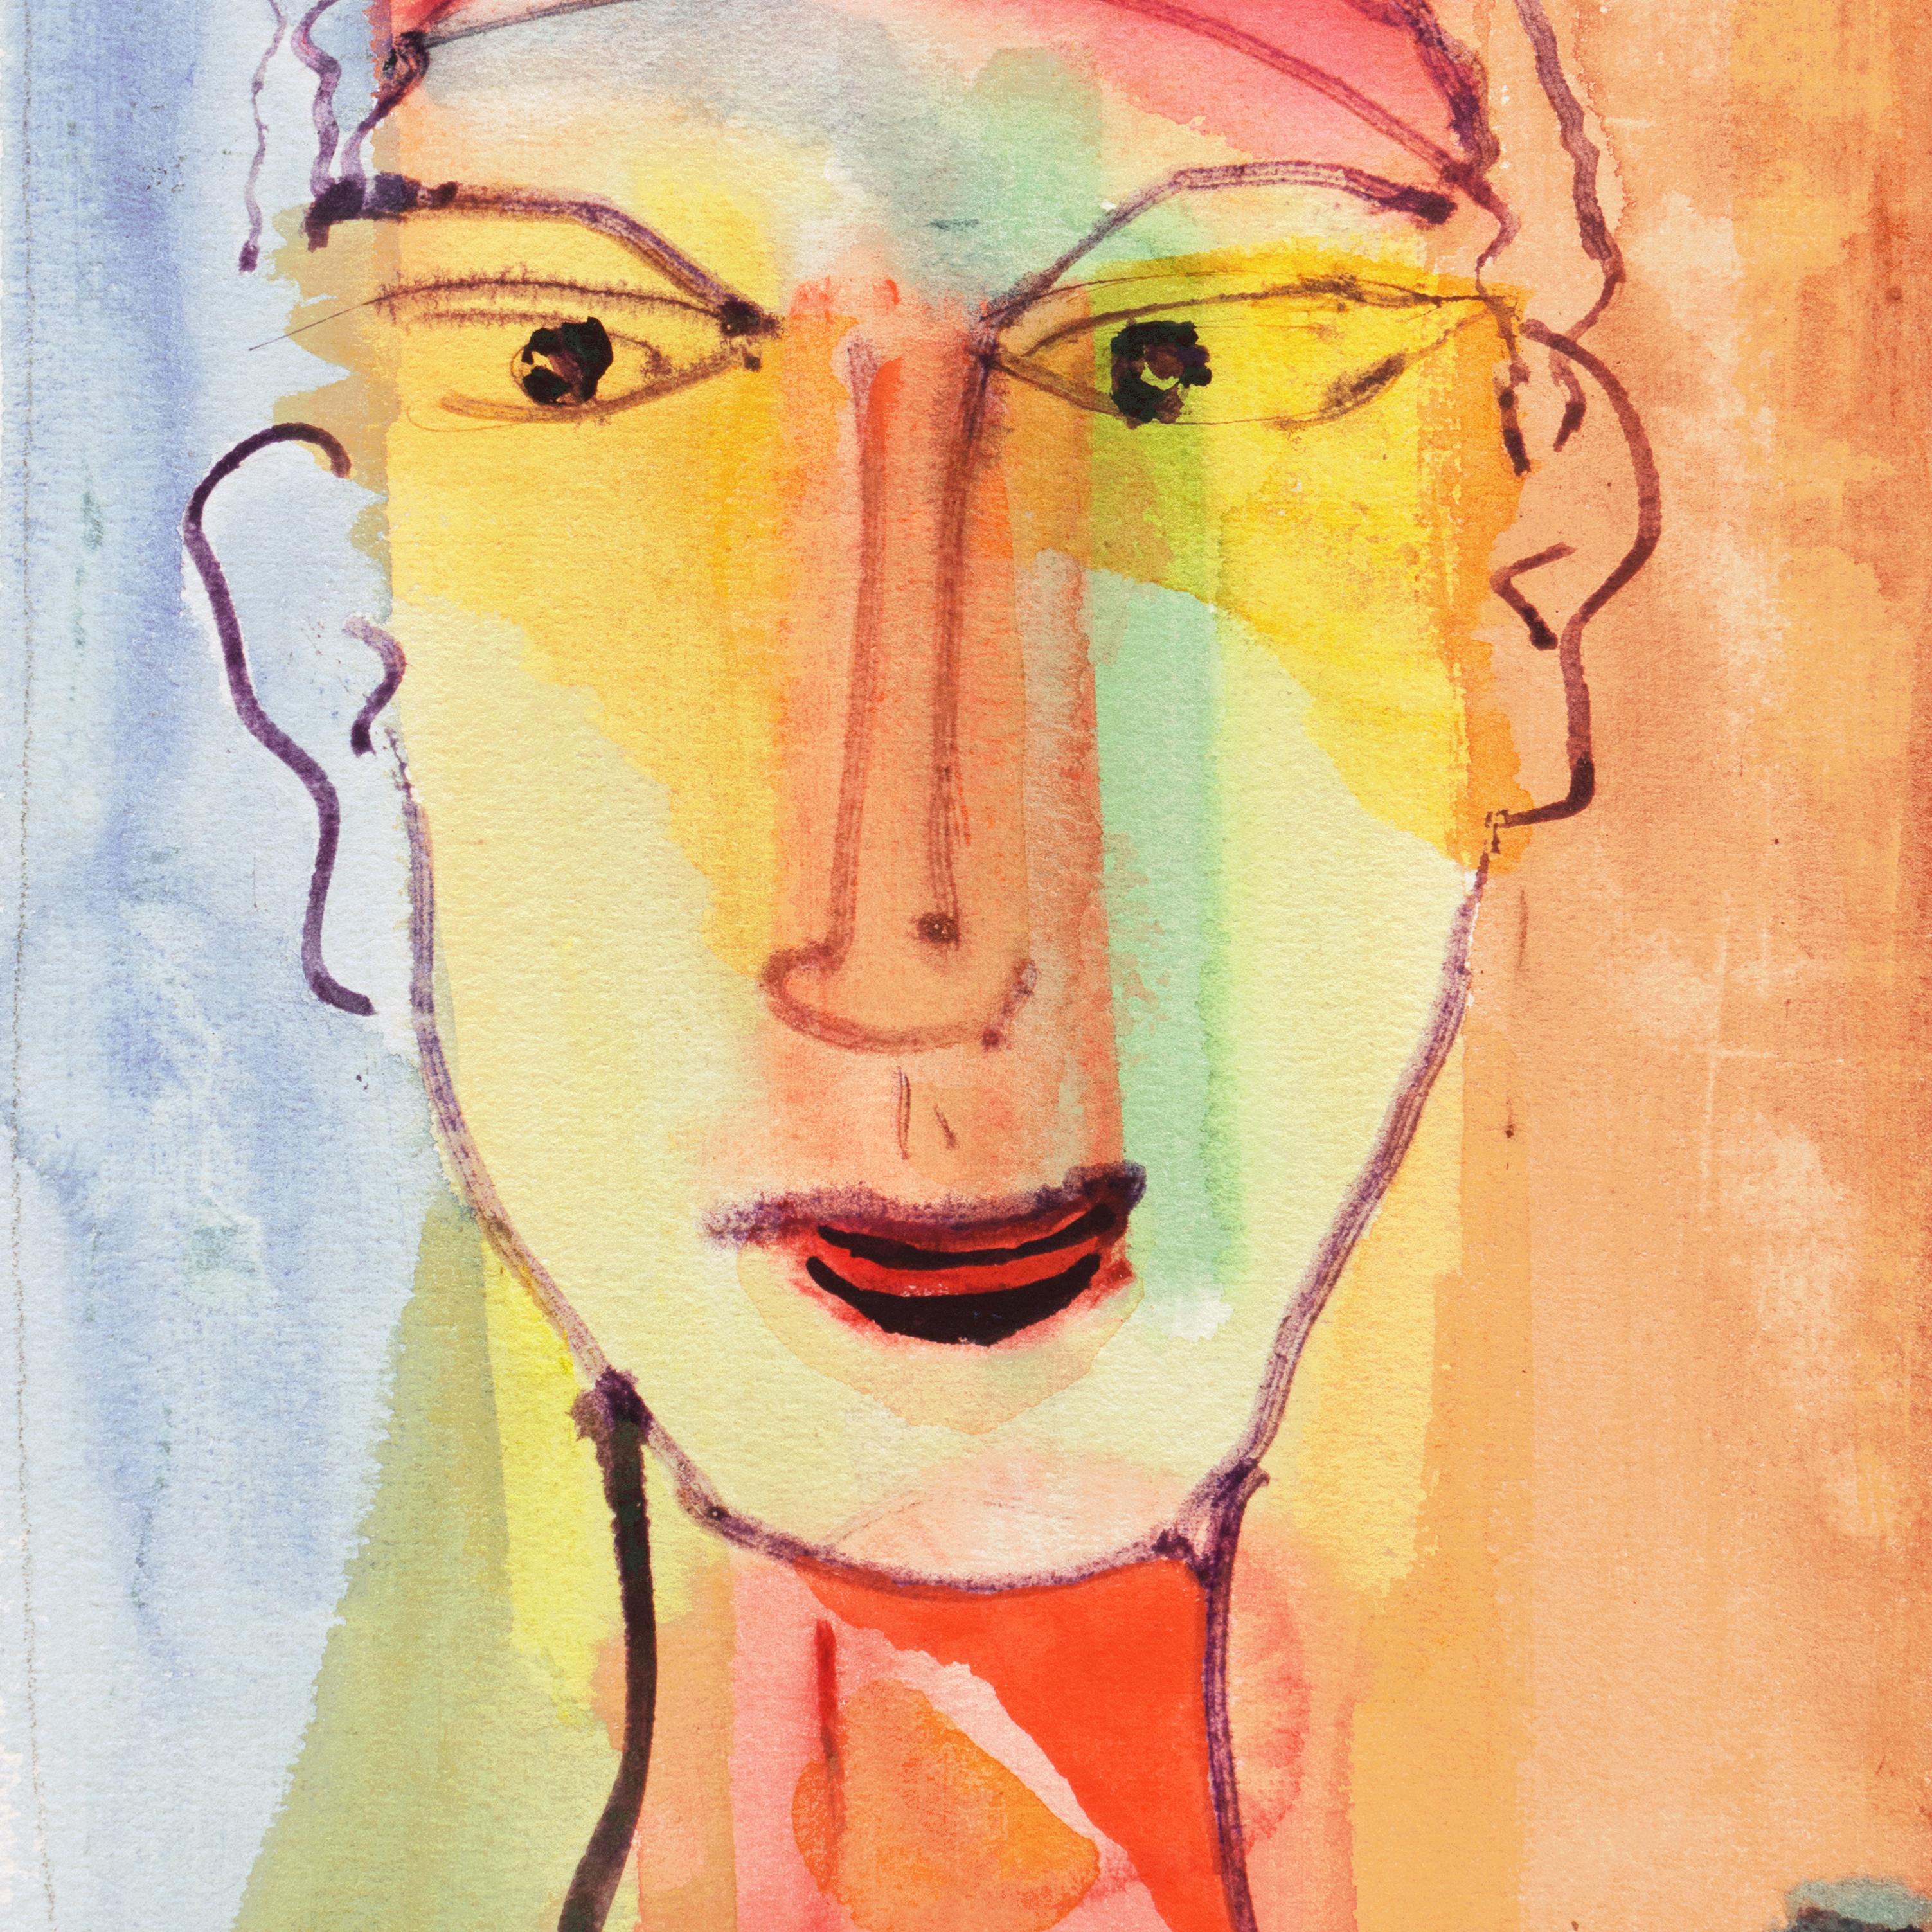 Expressionist Self Portrait by the Author of Tropic of Cancer and Black Spring 1